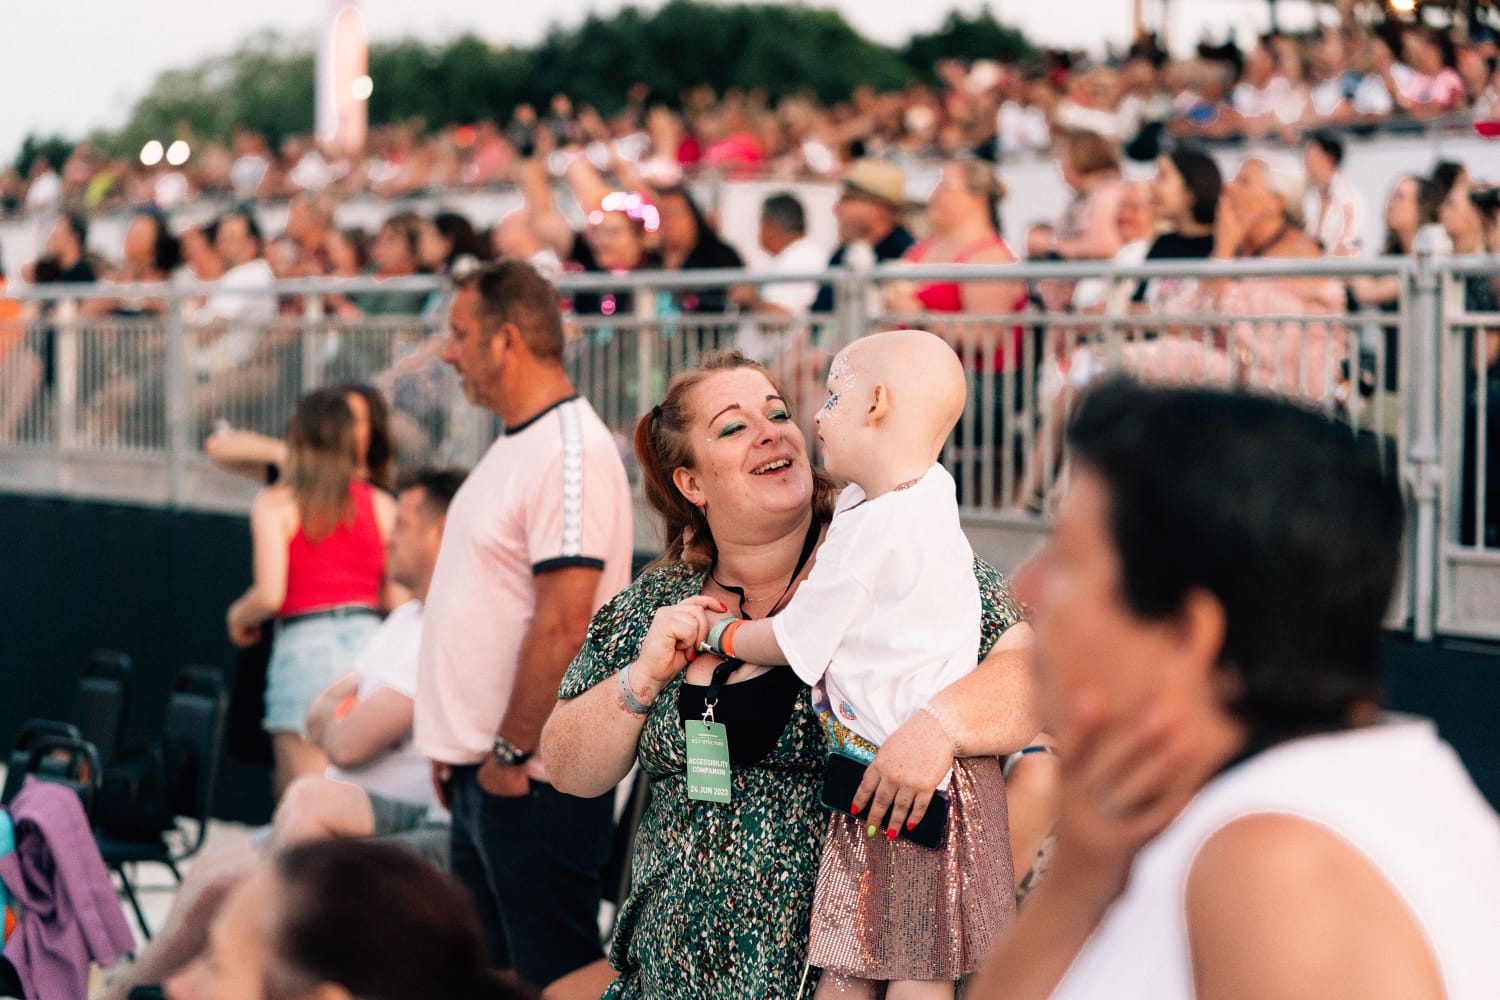 Little girl and her mum in the audience of a concert. The little girl is wearing a white t-shirt over a sparkly dress, and has no hair. The mum is wearing a green floral dress and smiling at her daughter.